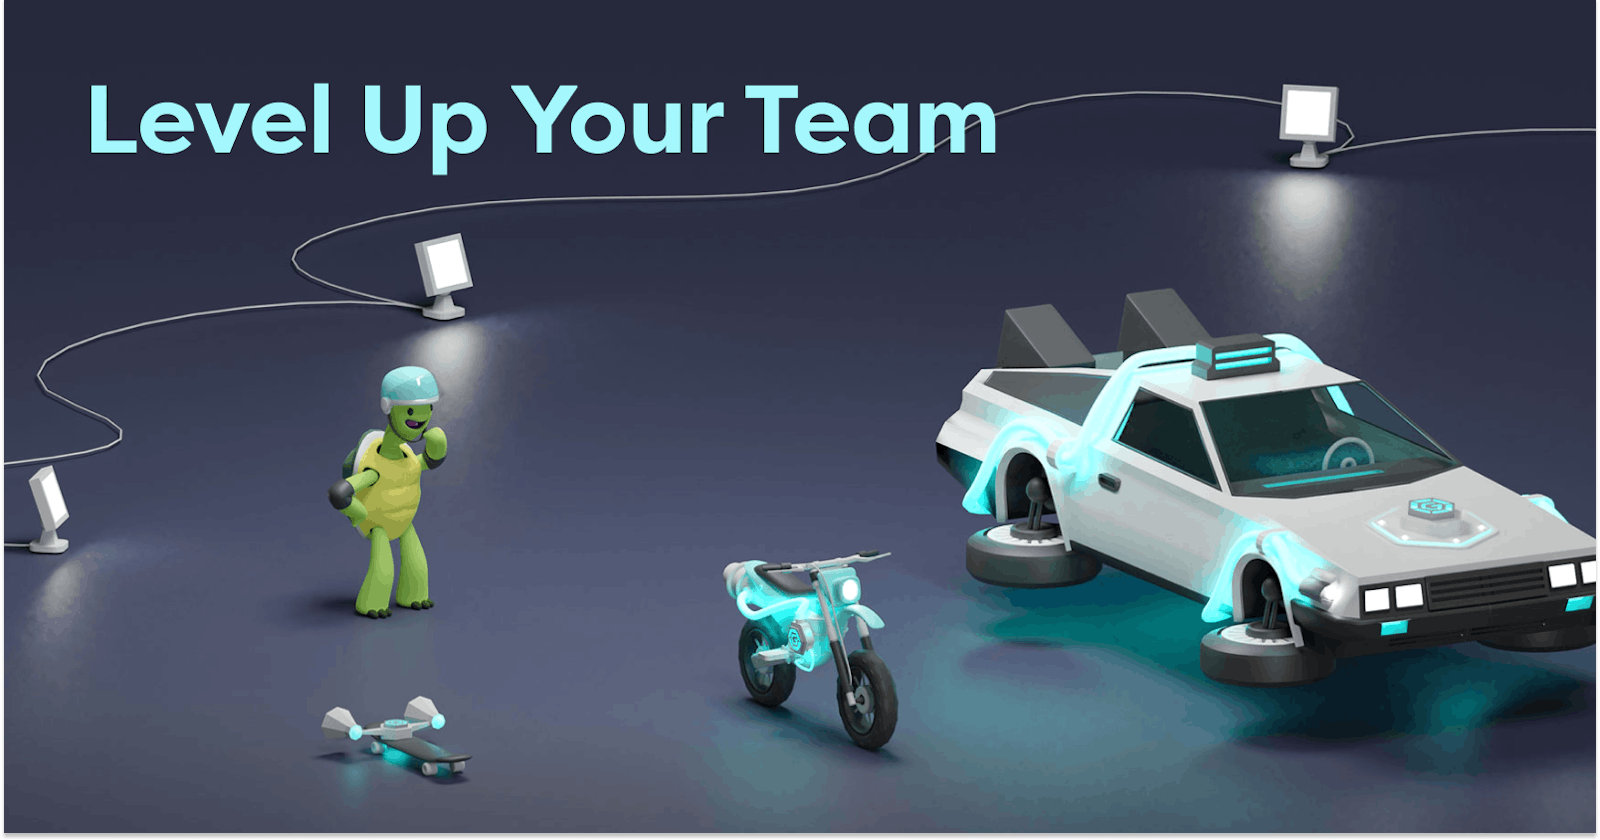 Level Up Your Team